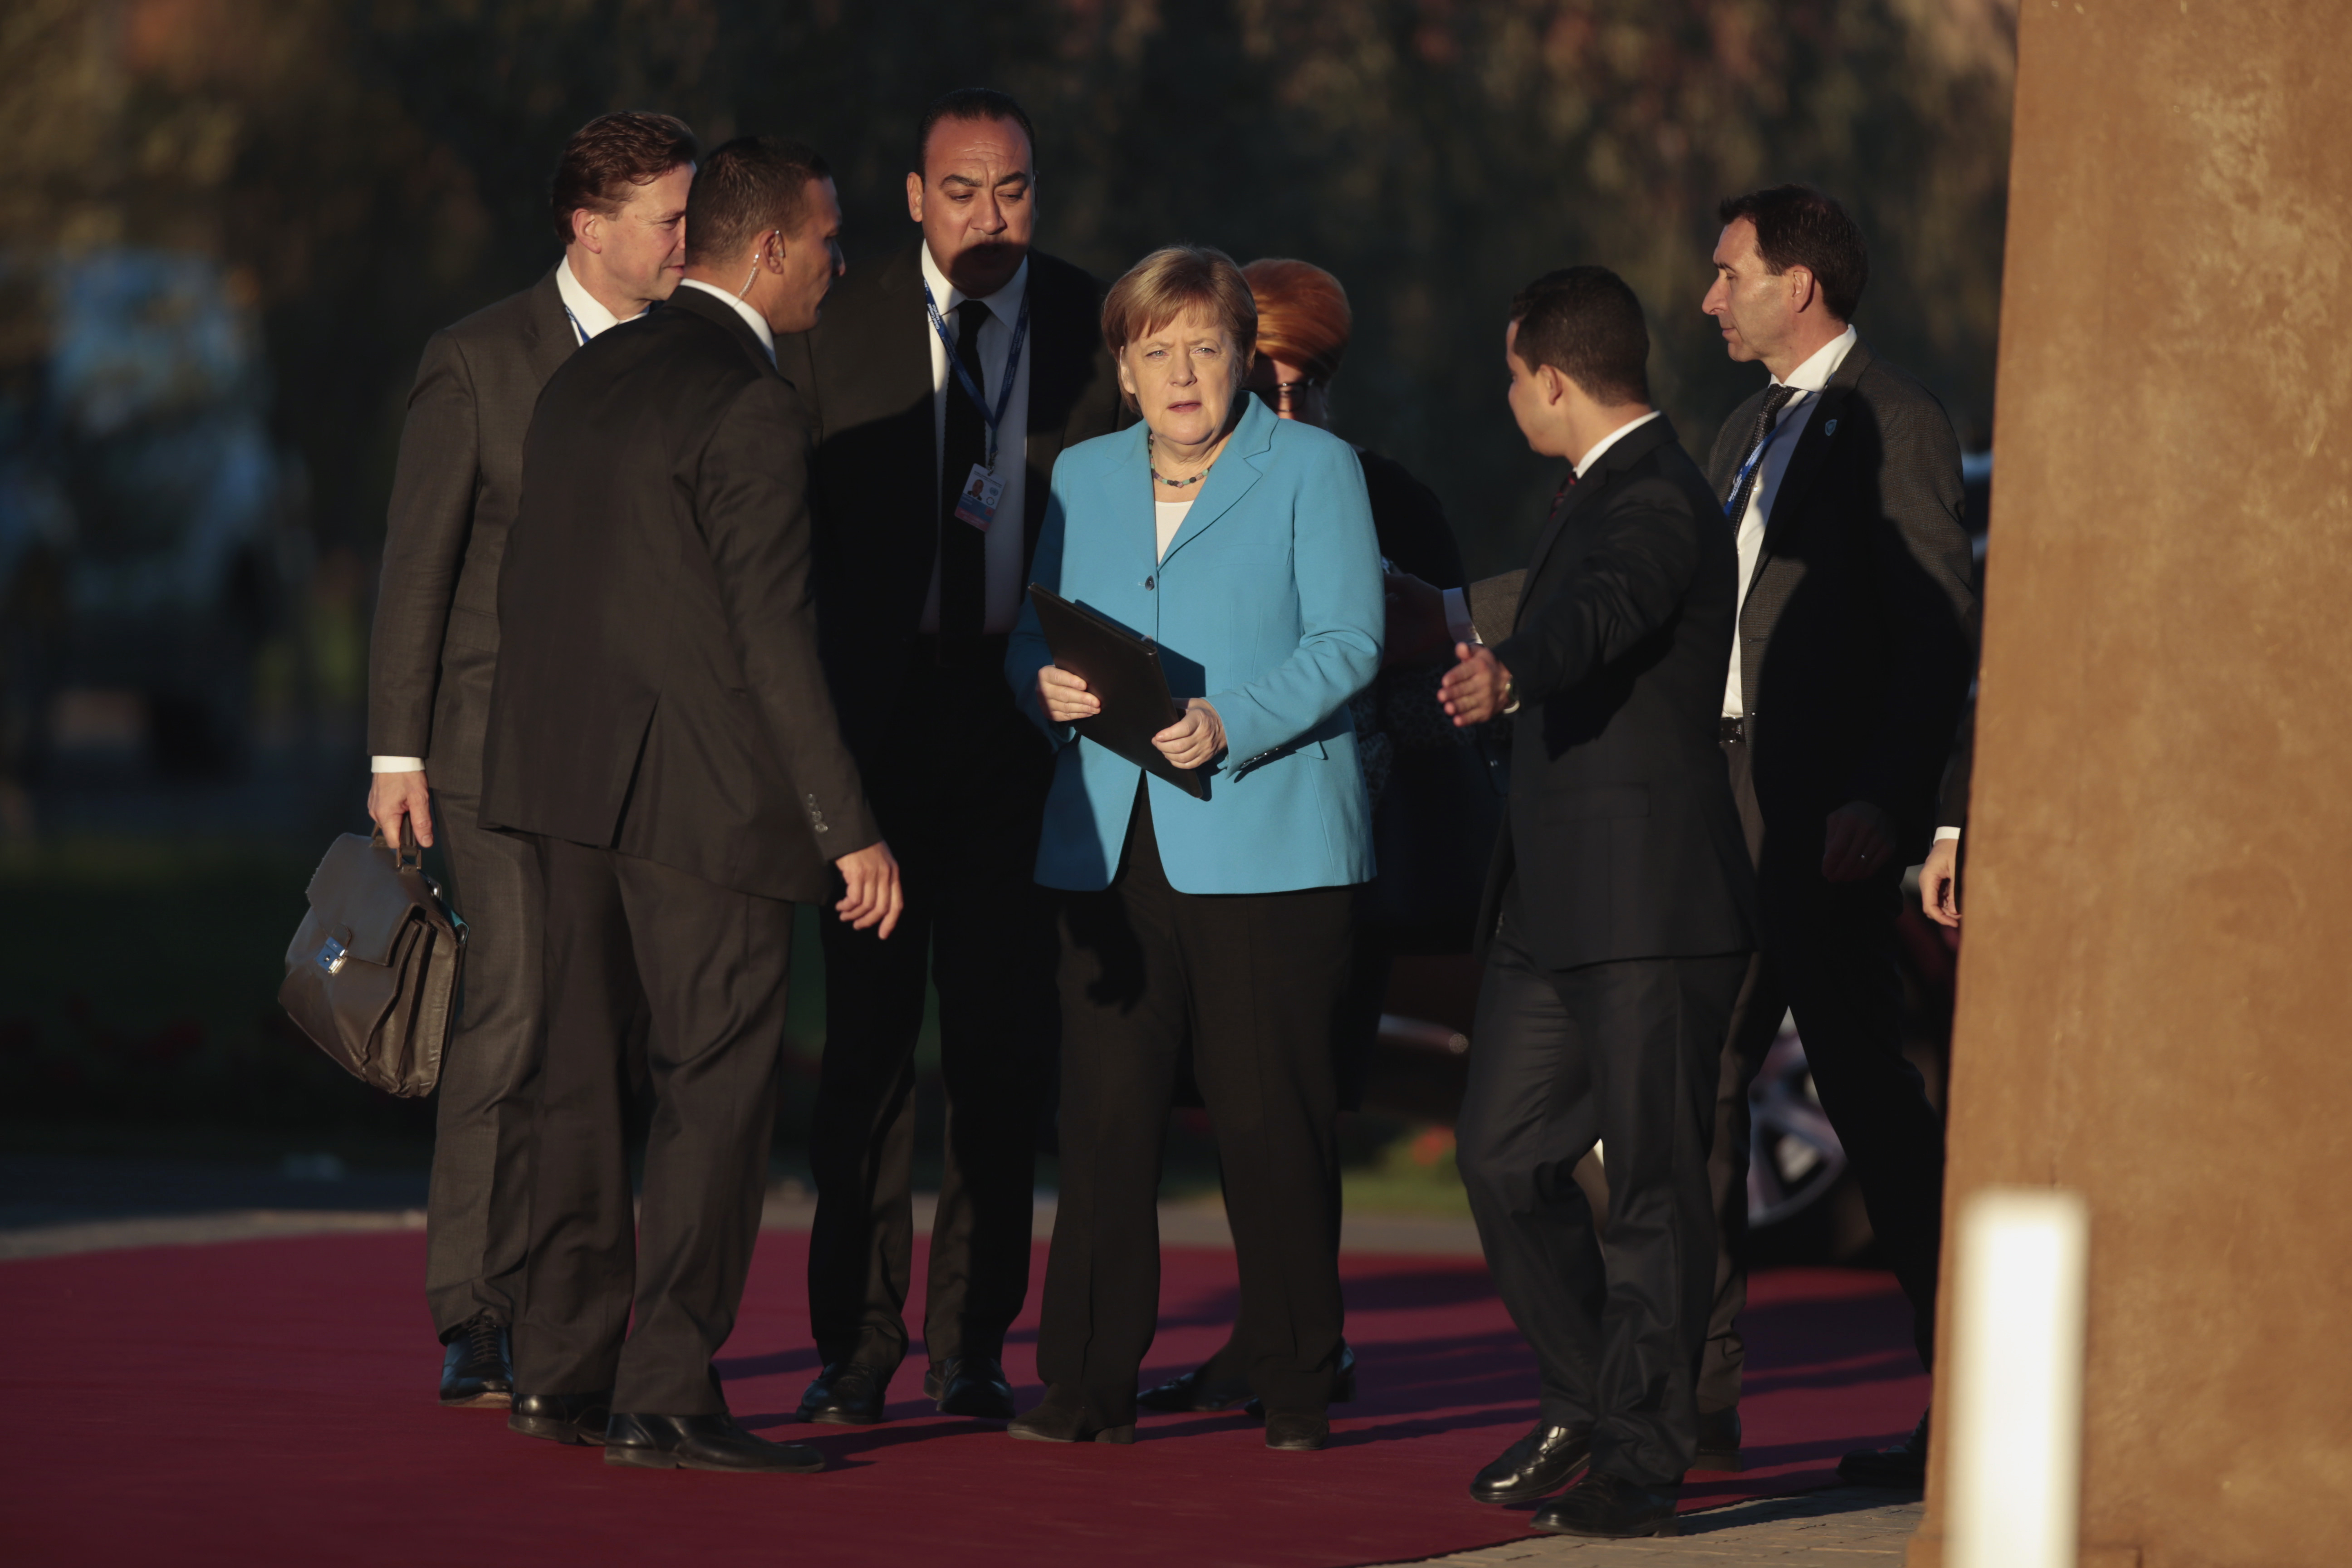 German Chancellor Angela Merkel arrives to attend a UN Migration Conference in Marrakech, Morocco, Monday, Dec.10, 2018. Top U.N. officials and government leaders from about 150 countries are uniting around an agreement on migration, while finding themselves on the defensive about the non-binding deal amid criticism and a walkout from the United States and some other countries. (AP Photo/Mosa'ab Elshamy)